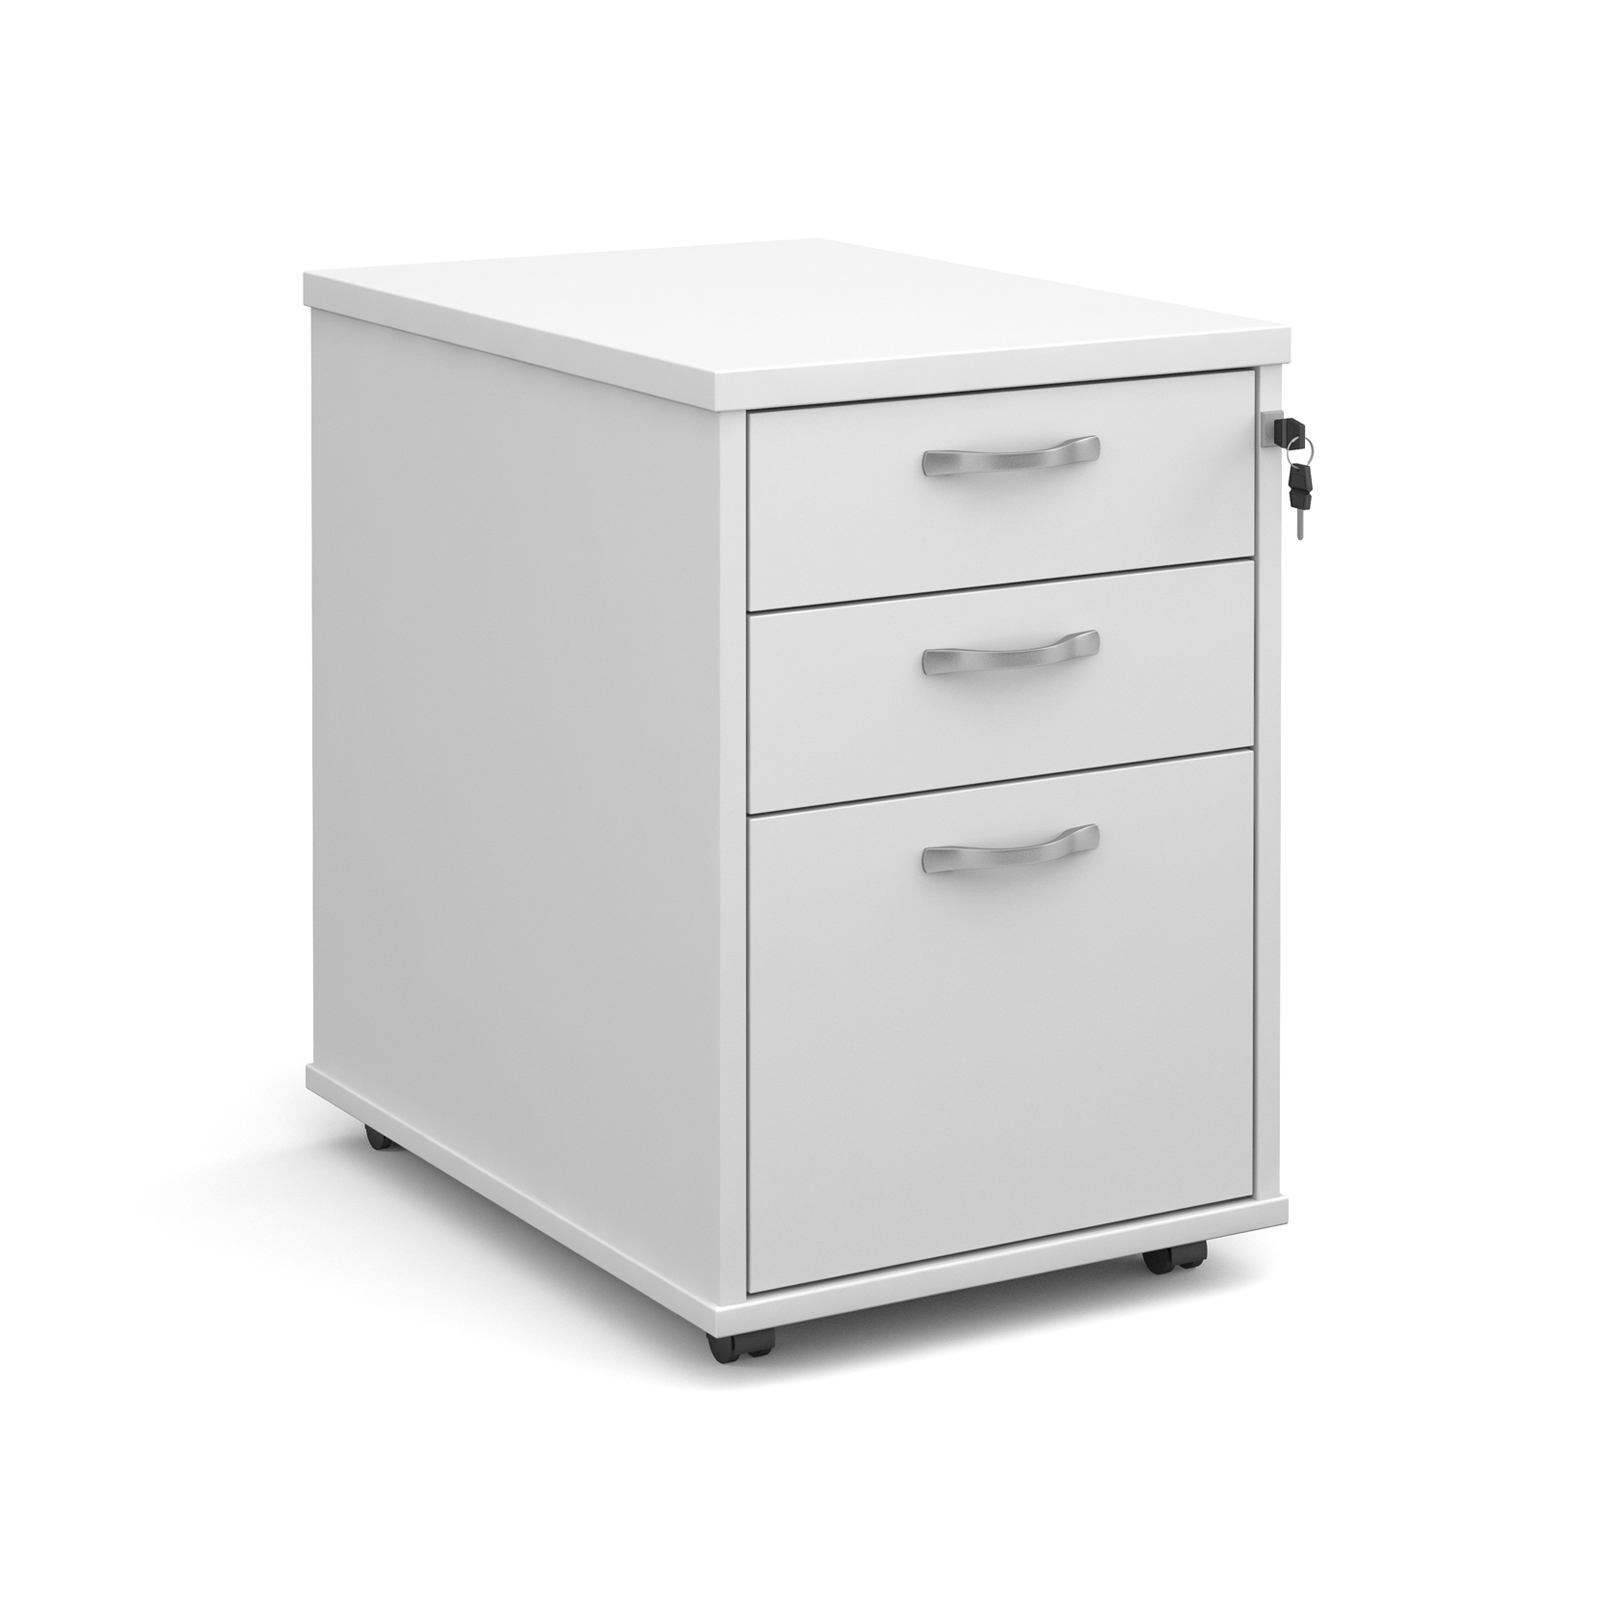 3 Drawer Tall mobile 3 drawer pedestal with silver handles 600mm deep - white